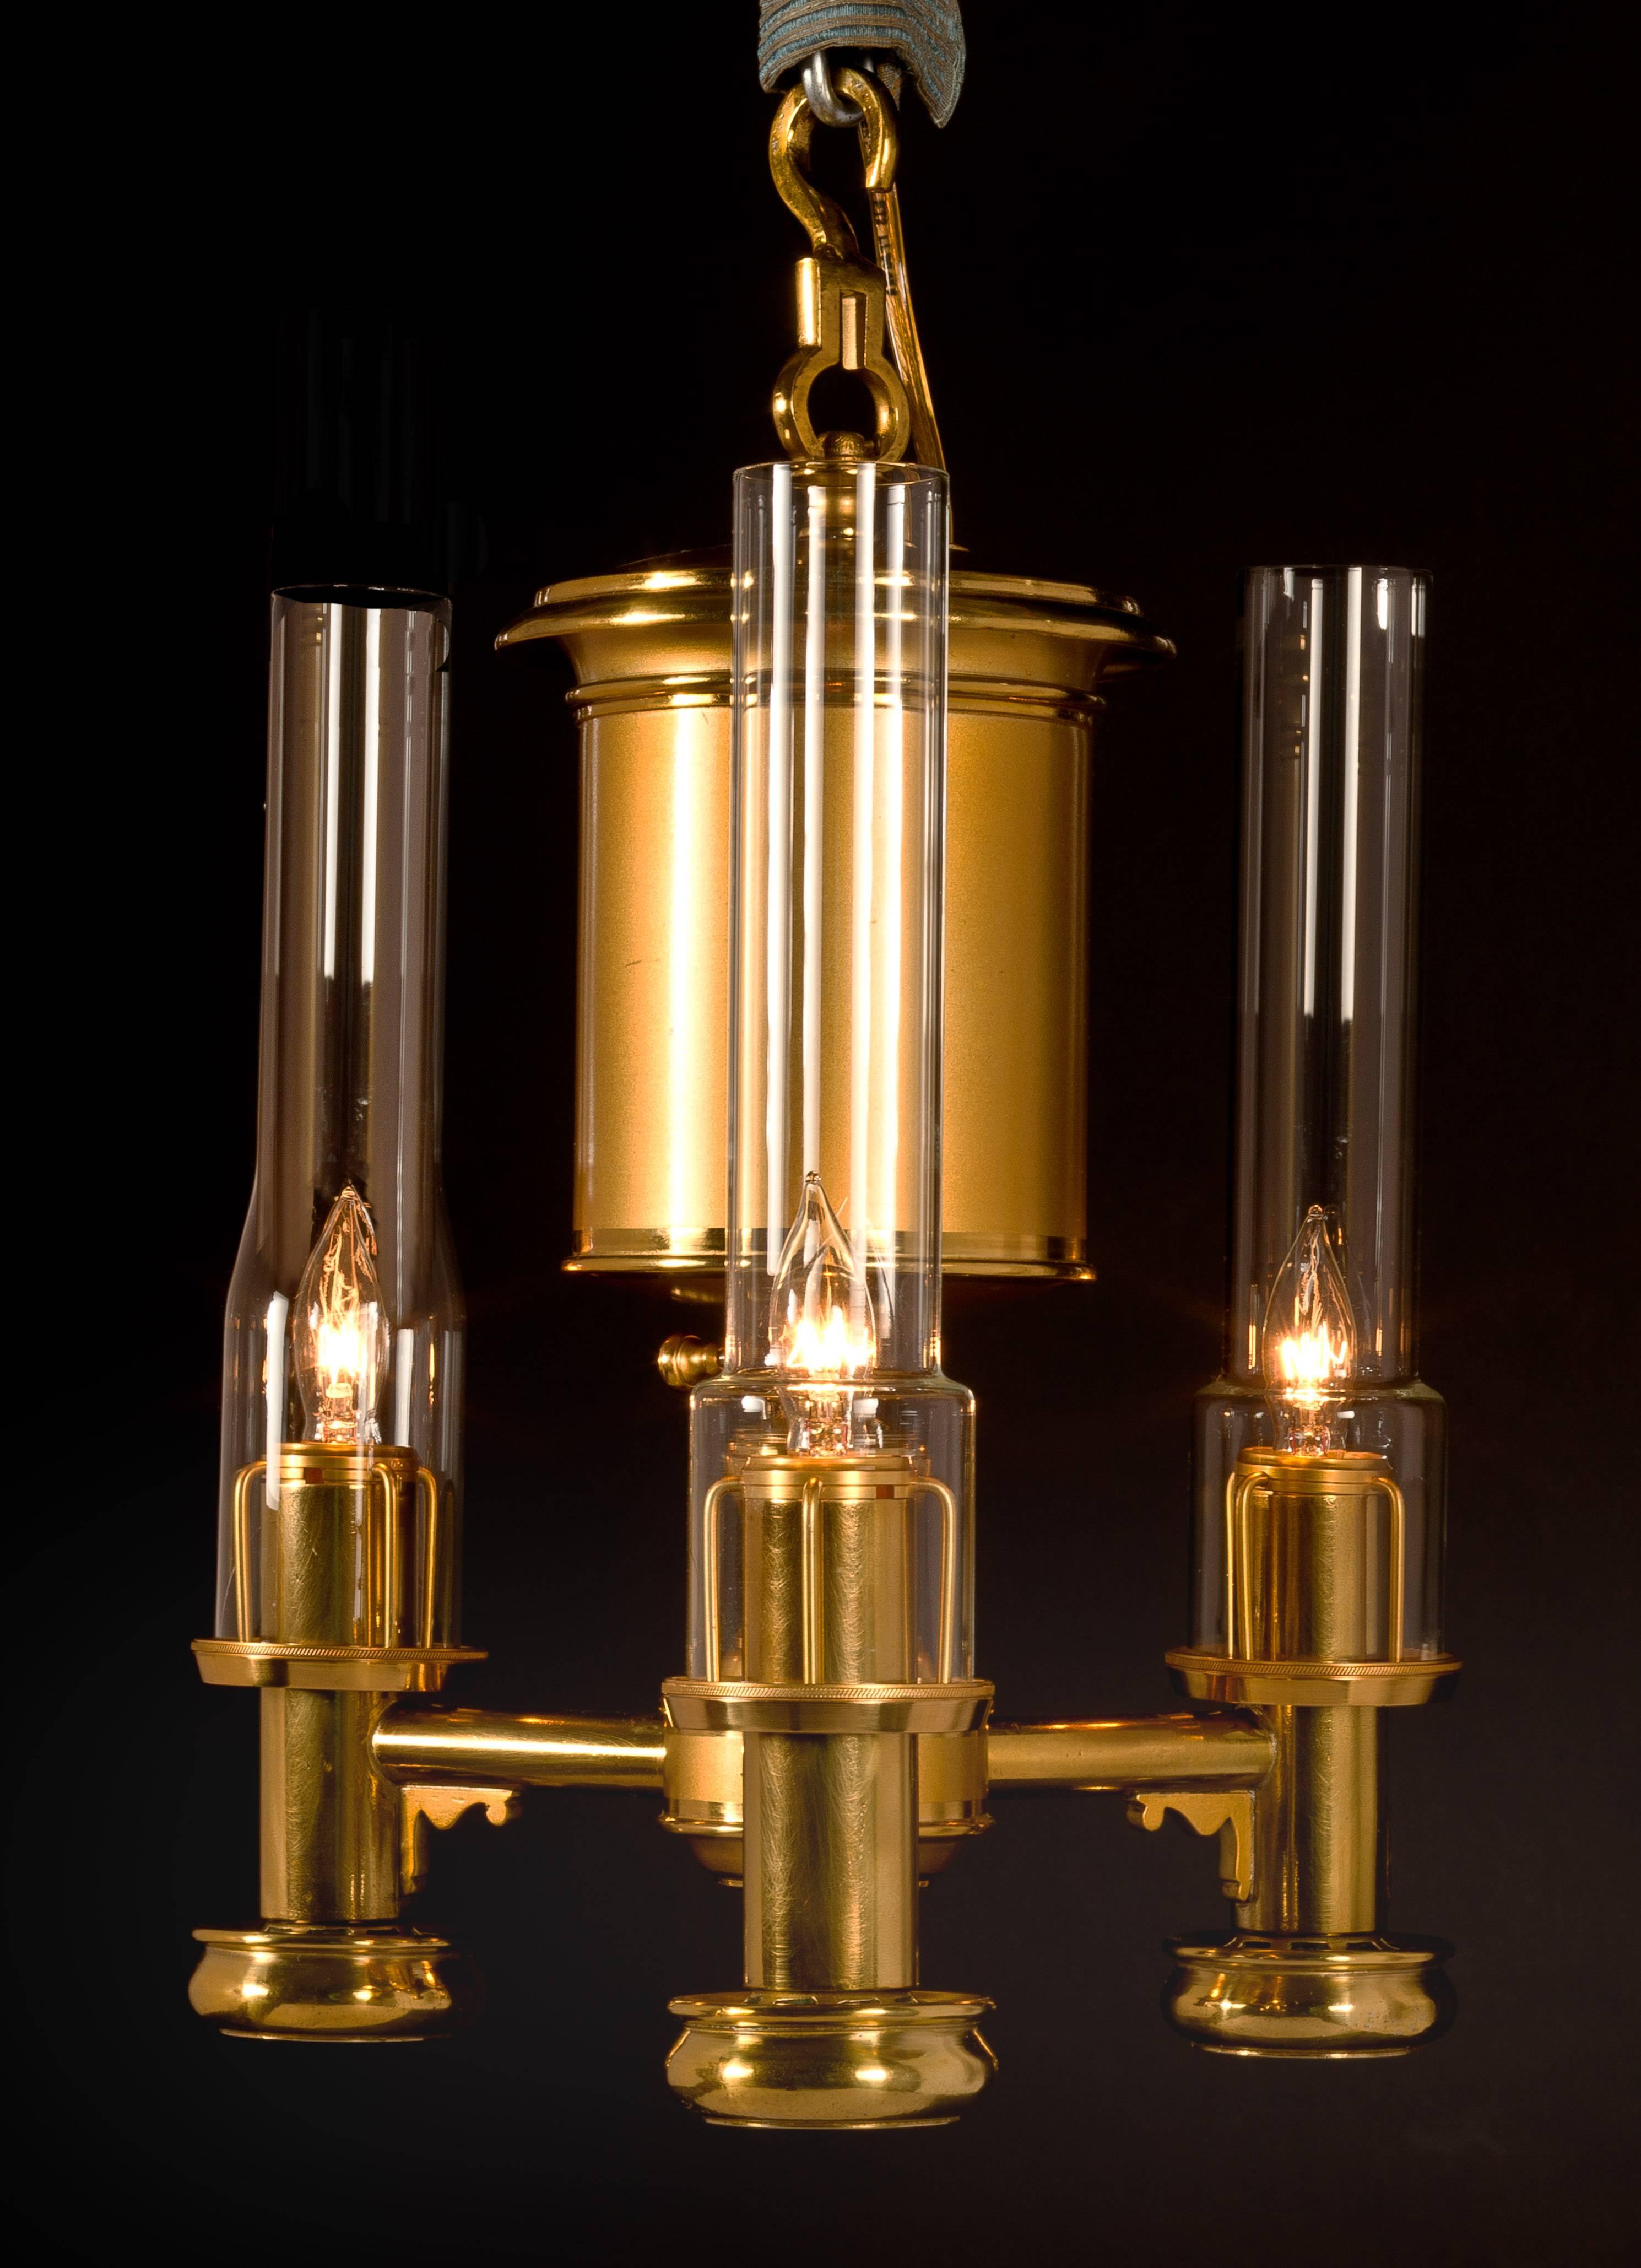 Labeled: Bright & Co./Late/ ARGAND & Co. / BRUTON St.
London, 1825-1830

The matte and burnished lacquered brass cylindrical oil font suspended from a brass loop and hook, with three fuel arms each with burner tubes with drip cups, the font with